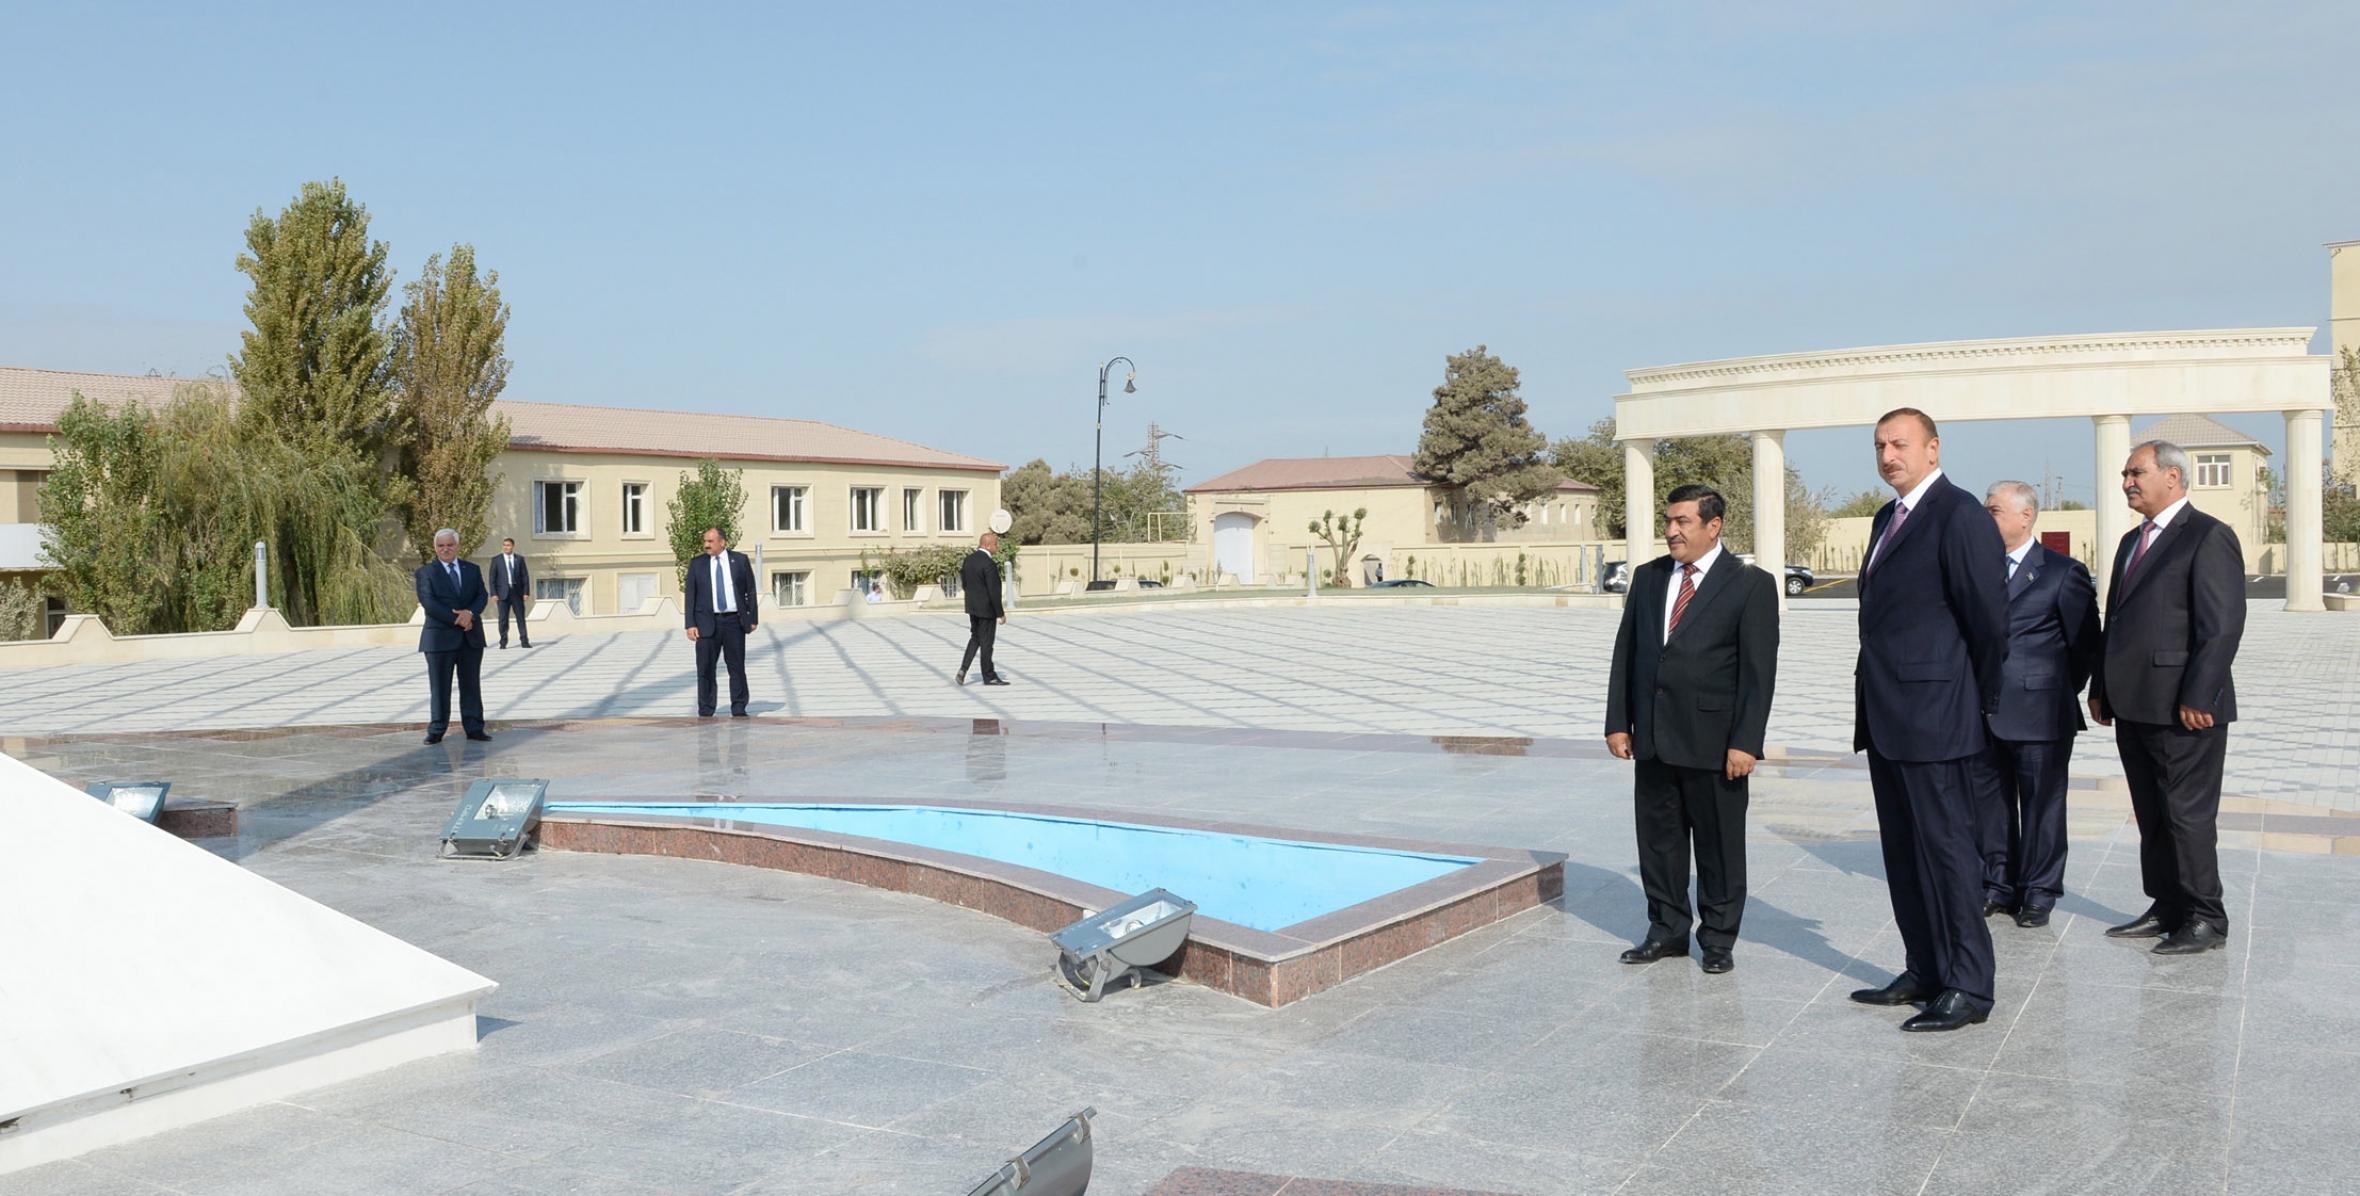 Ilham Aliyev reviewed the Flag Square in Salyan